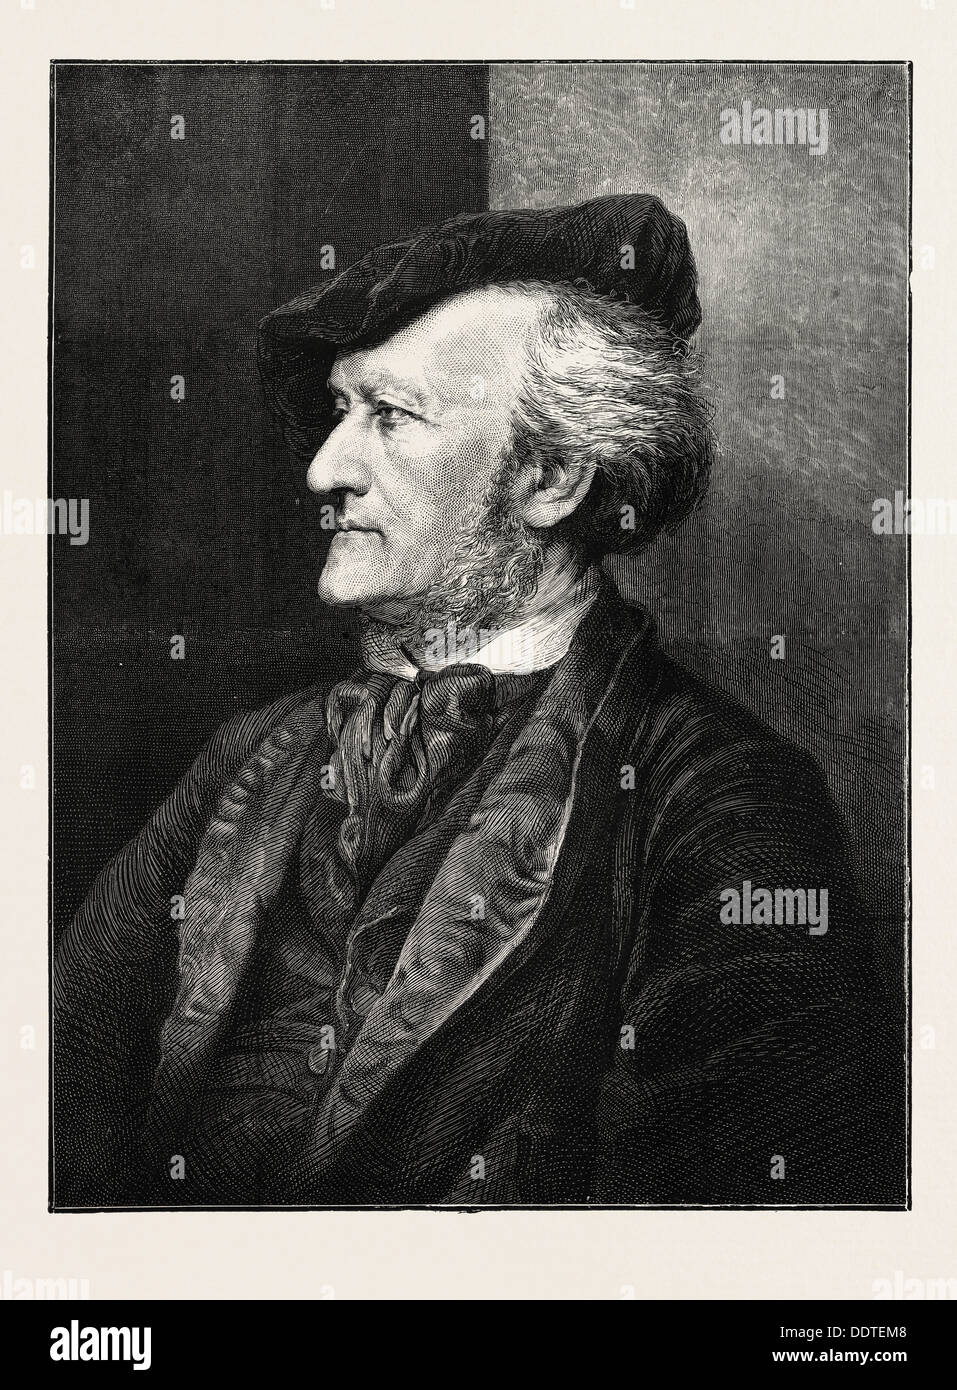 RICHARD WAGNER,1813-1883, MUSICAL COMPOSER, 1873 engraving Stock Photo